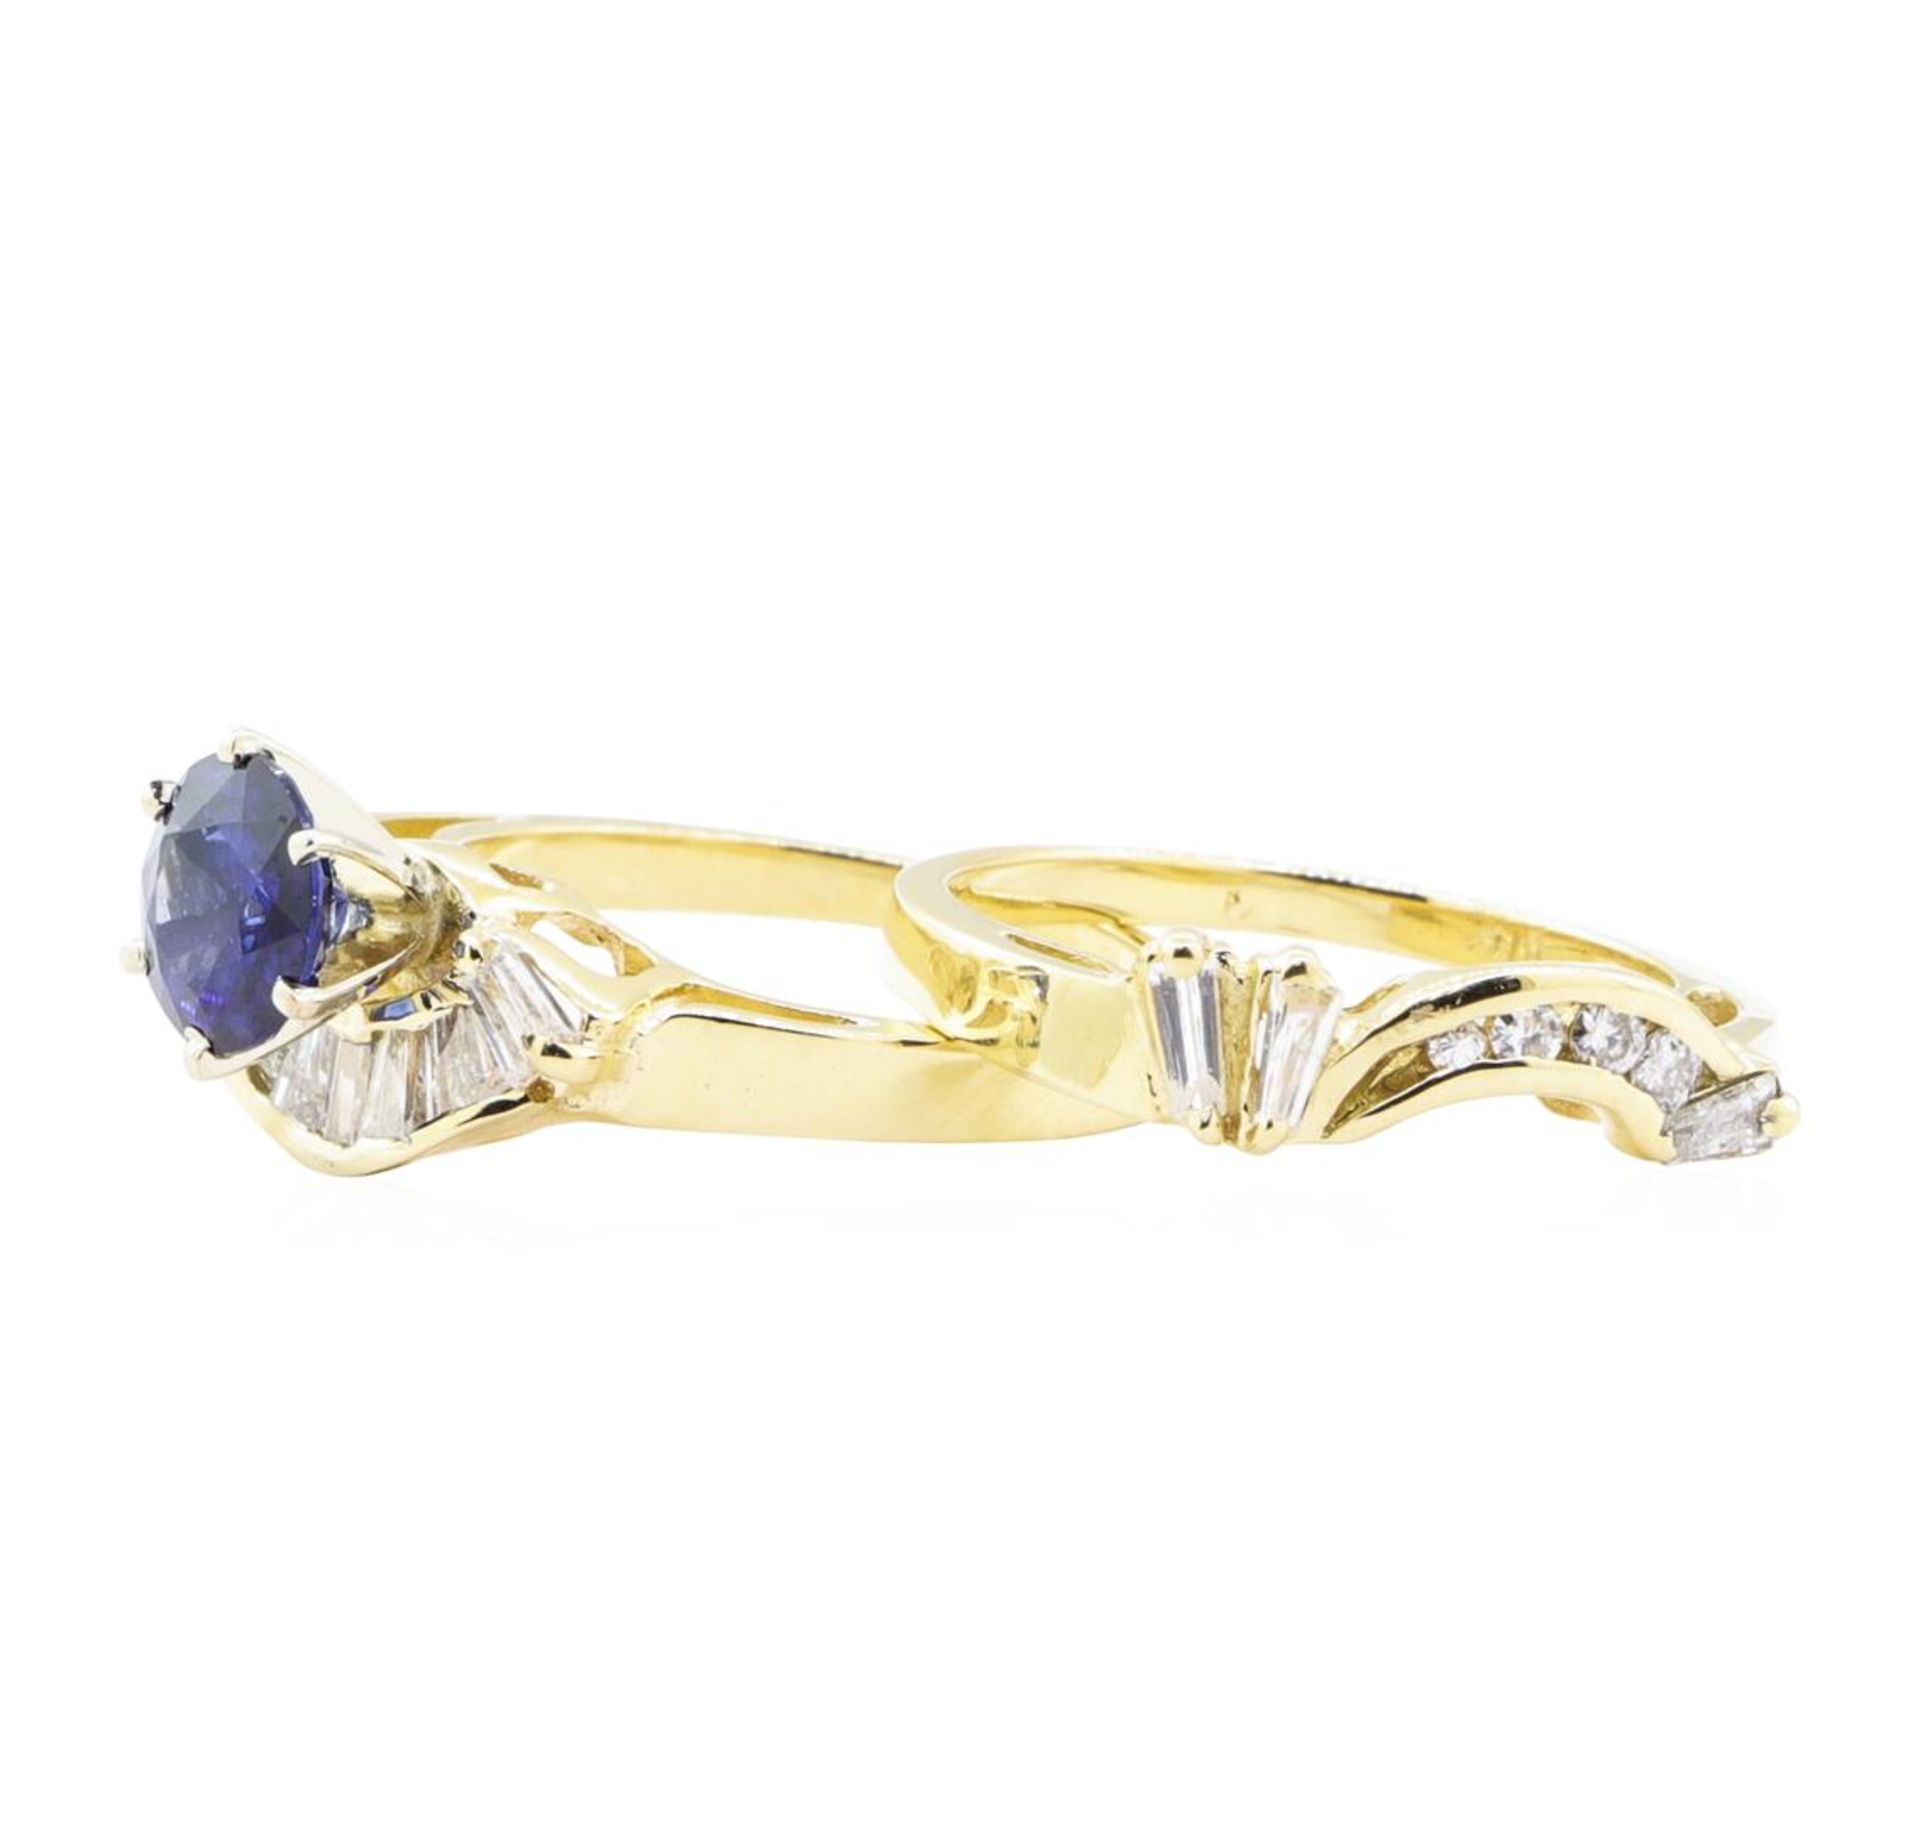 1.83 ctw Sapphire And Diamond Ring And Band - 14KT Yellow Gold - Image 3 of 4